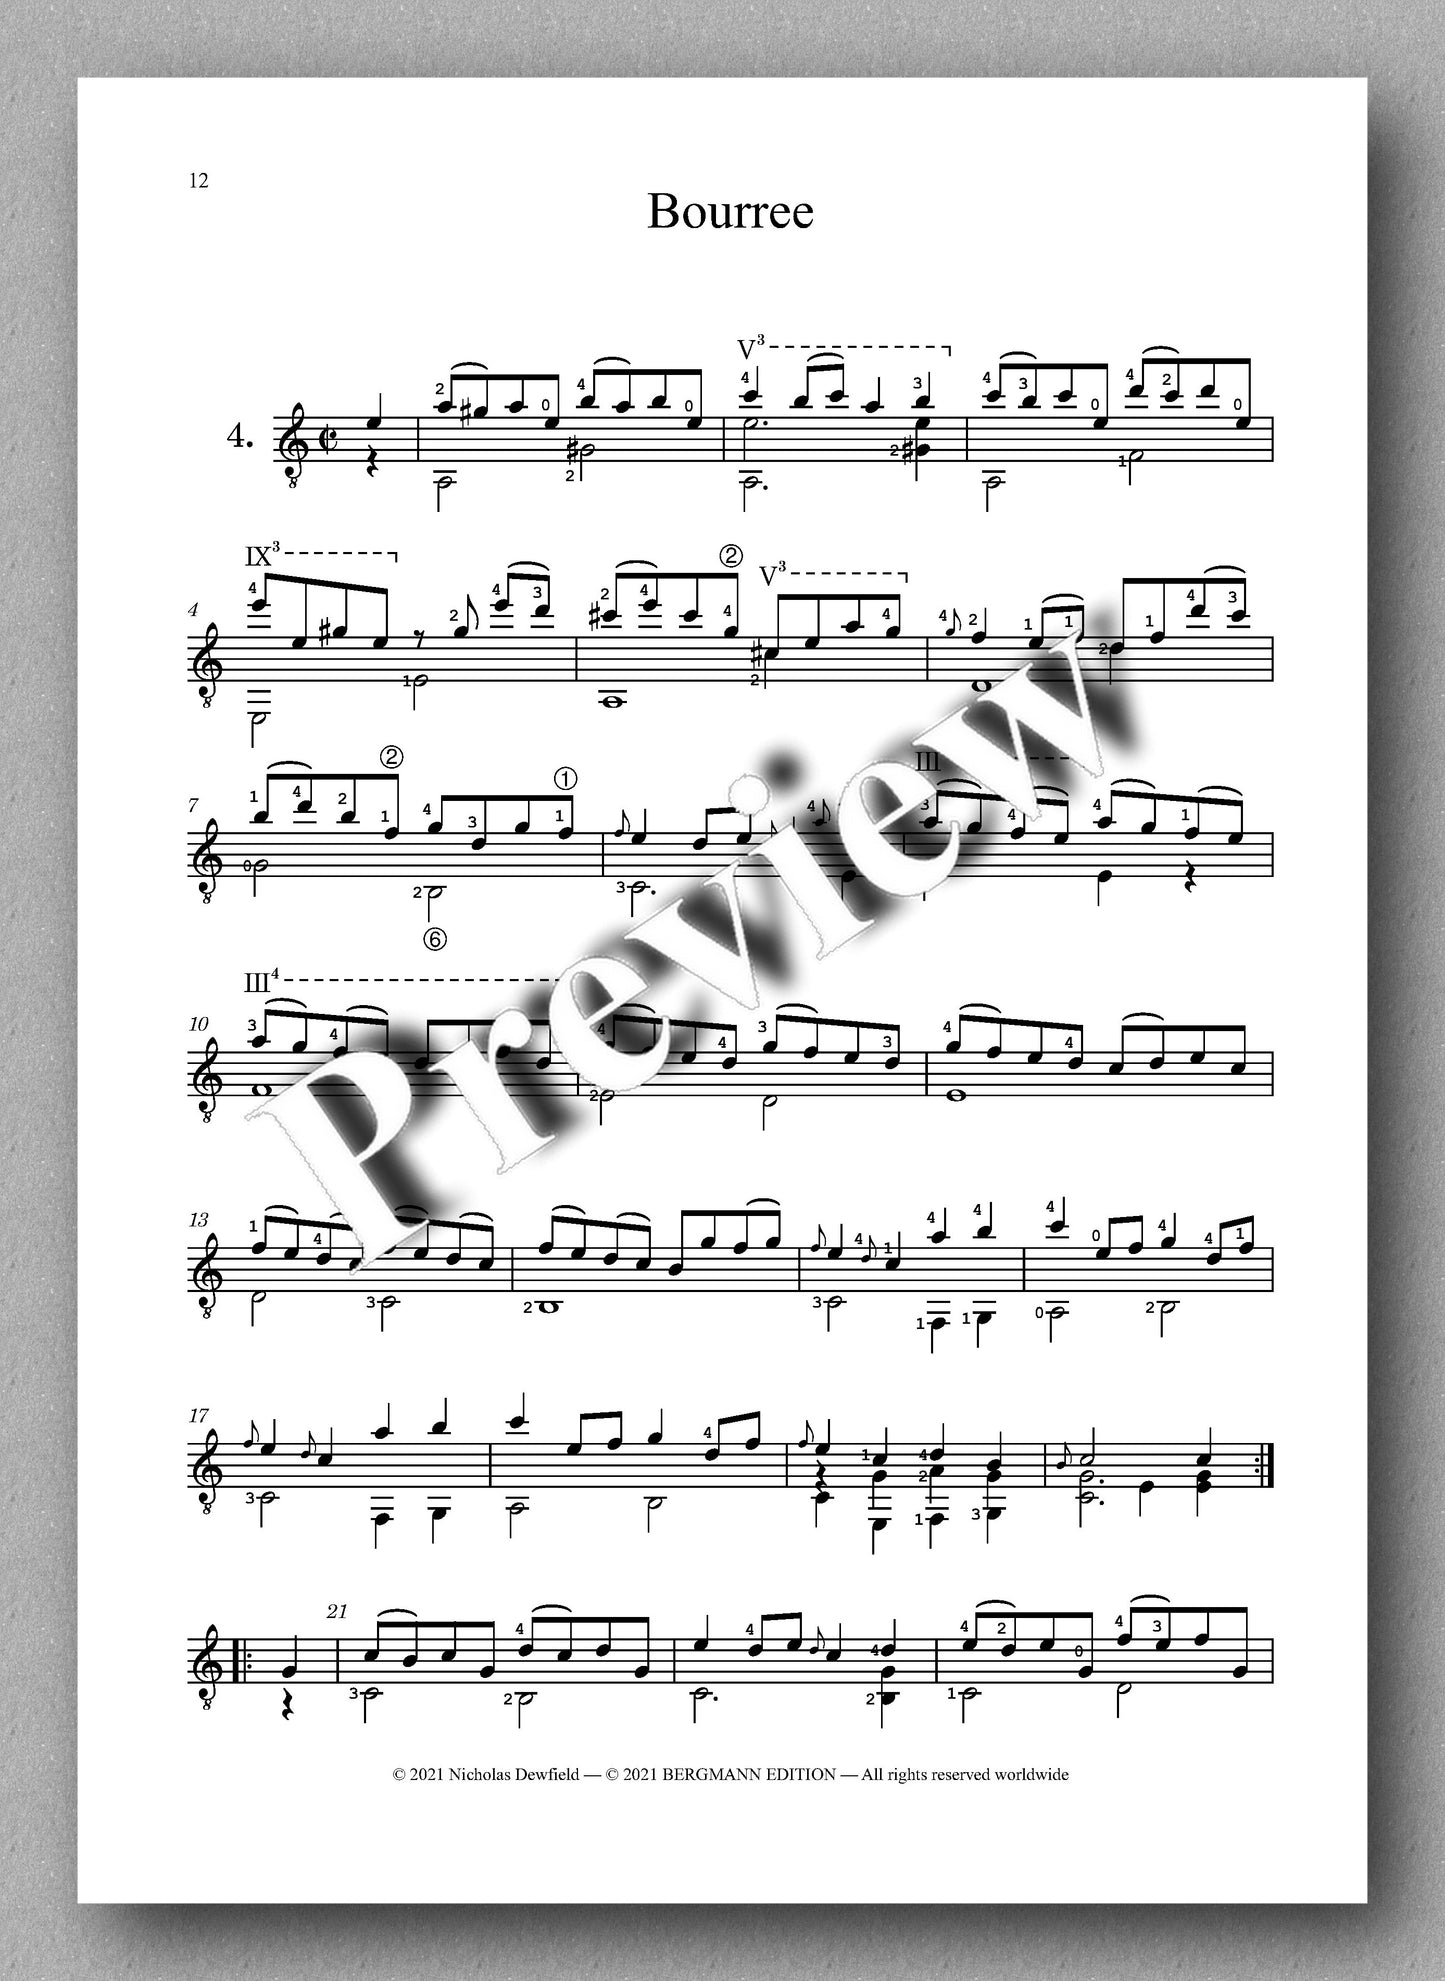 Weiss-Dewfield, Sonata No. 3 - preview of music score 4